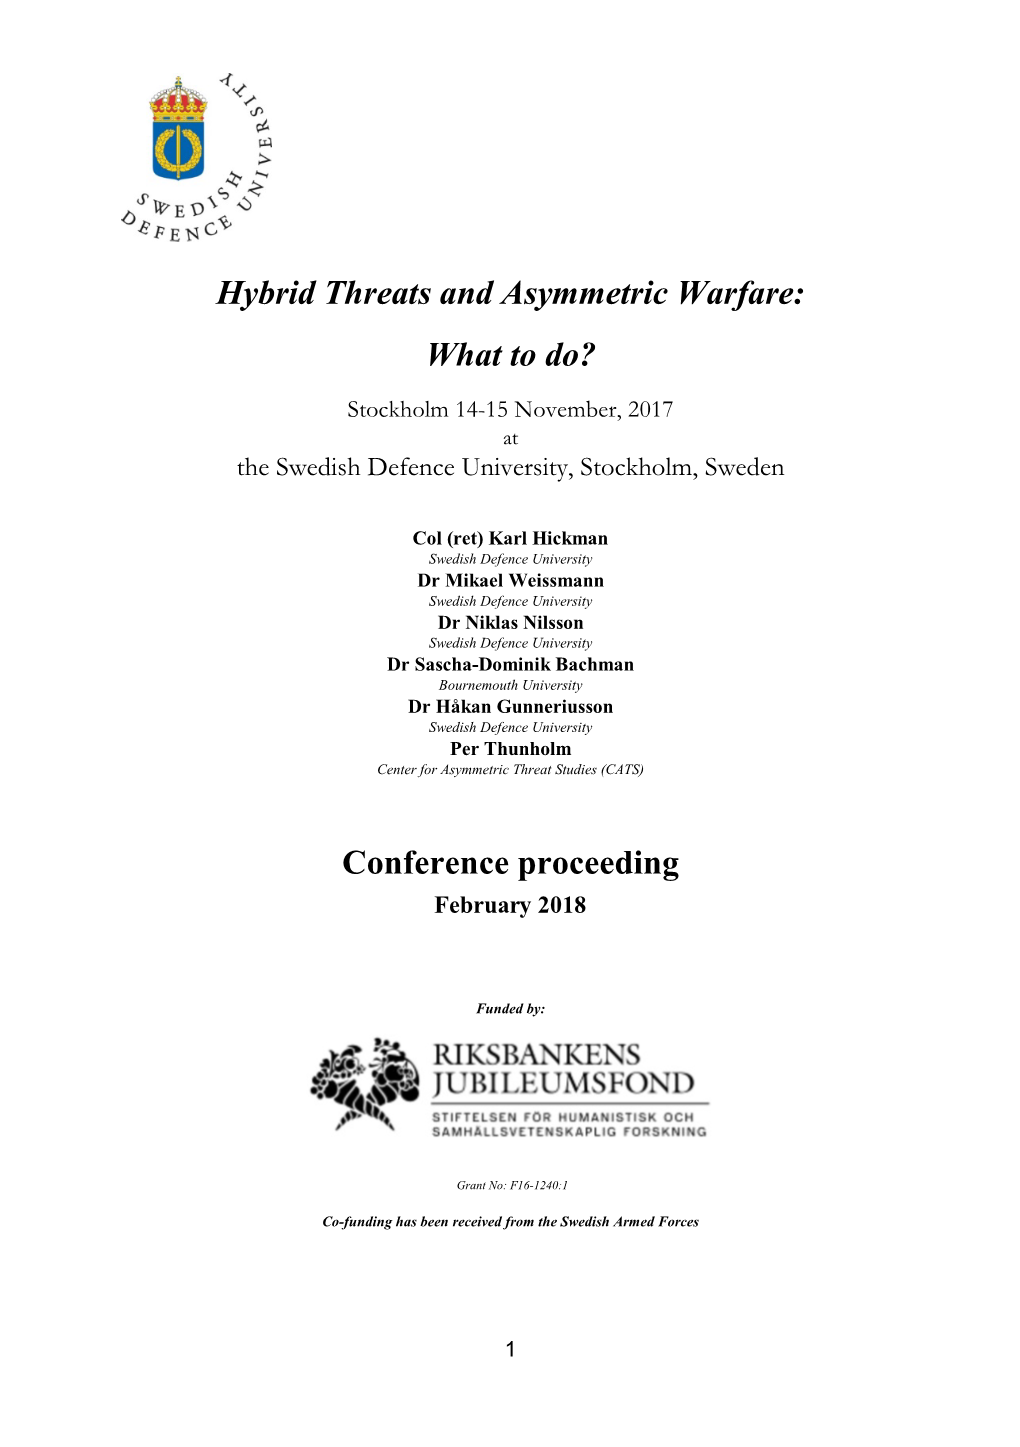 Hybrid Threats and Asymmetric Warfare: What to Do? Conference Proceeding